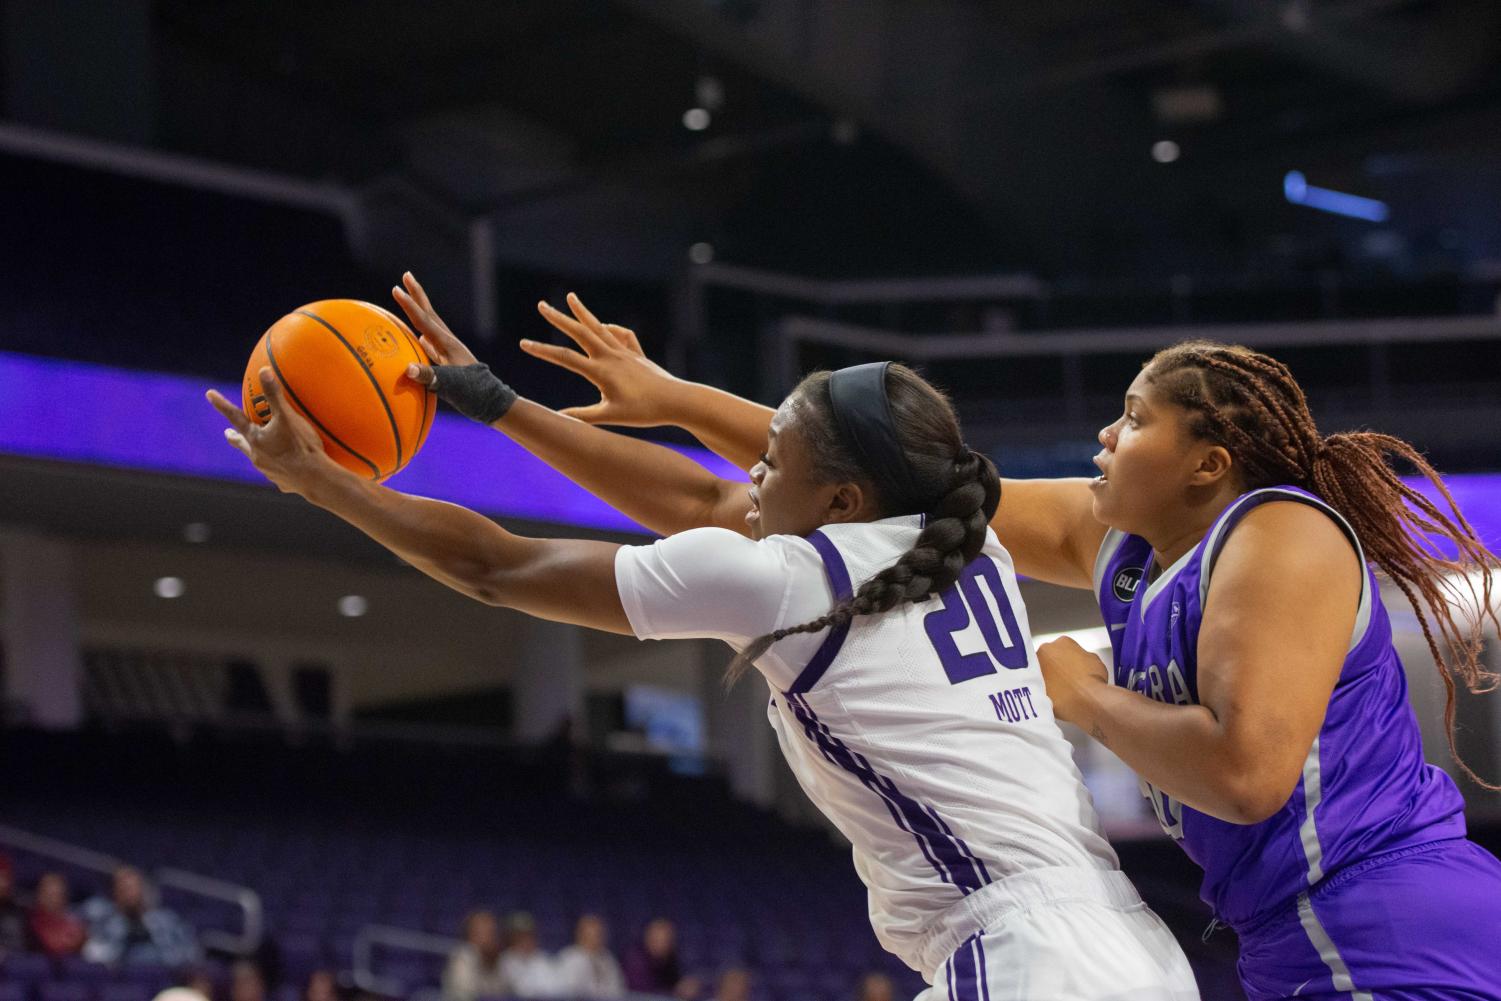 A basketball player in white catches the ball to the left while someone in purple tries to reach for it.